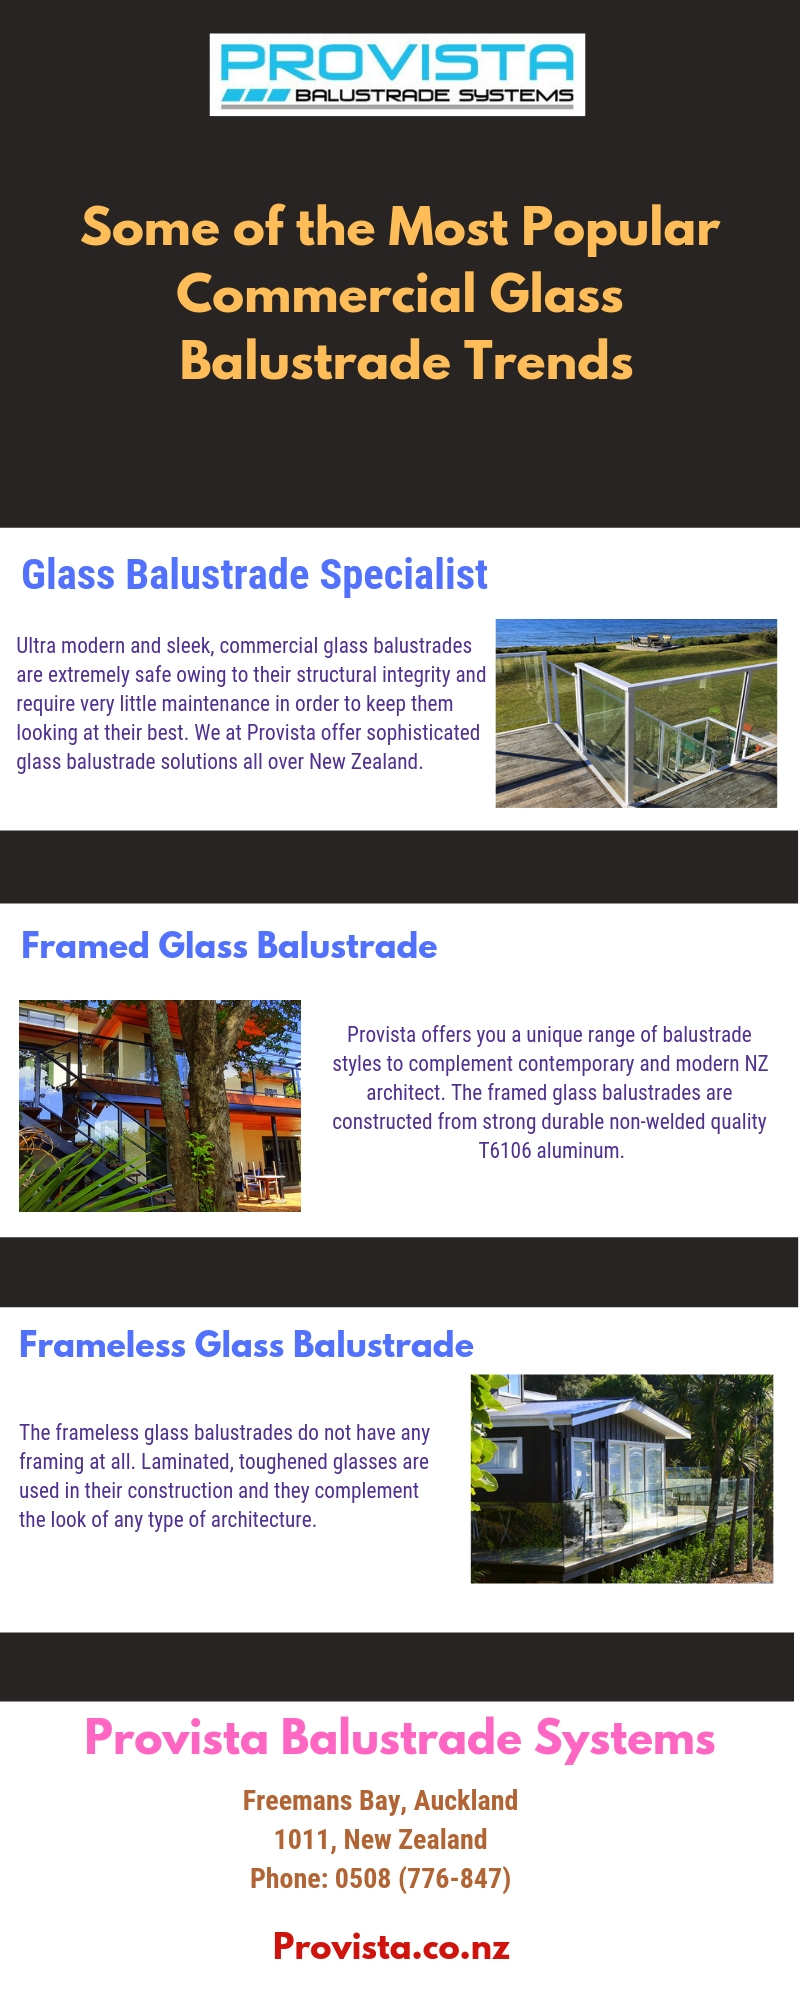 Some of the Most Popular Commercial Glass Balustrade Trends.jpg Glass balustrades are being increasingly used in commercial and residential structures. For more details,visit this link: https://bit.ly/2FpO4Uw
 by Provista